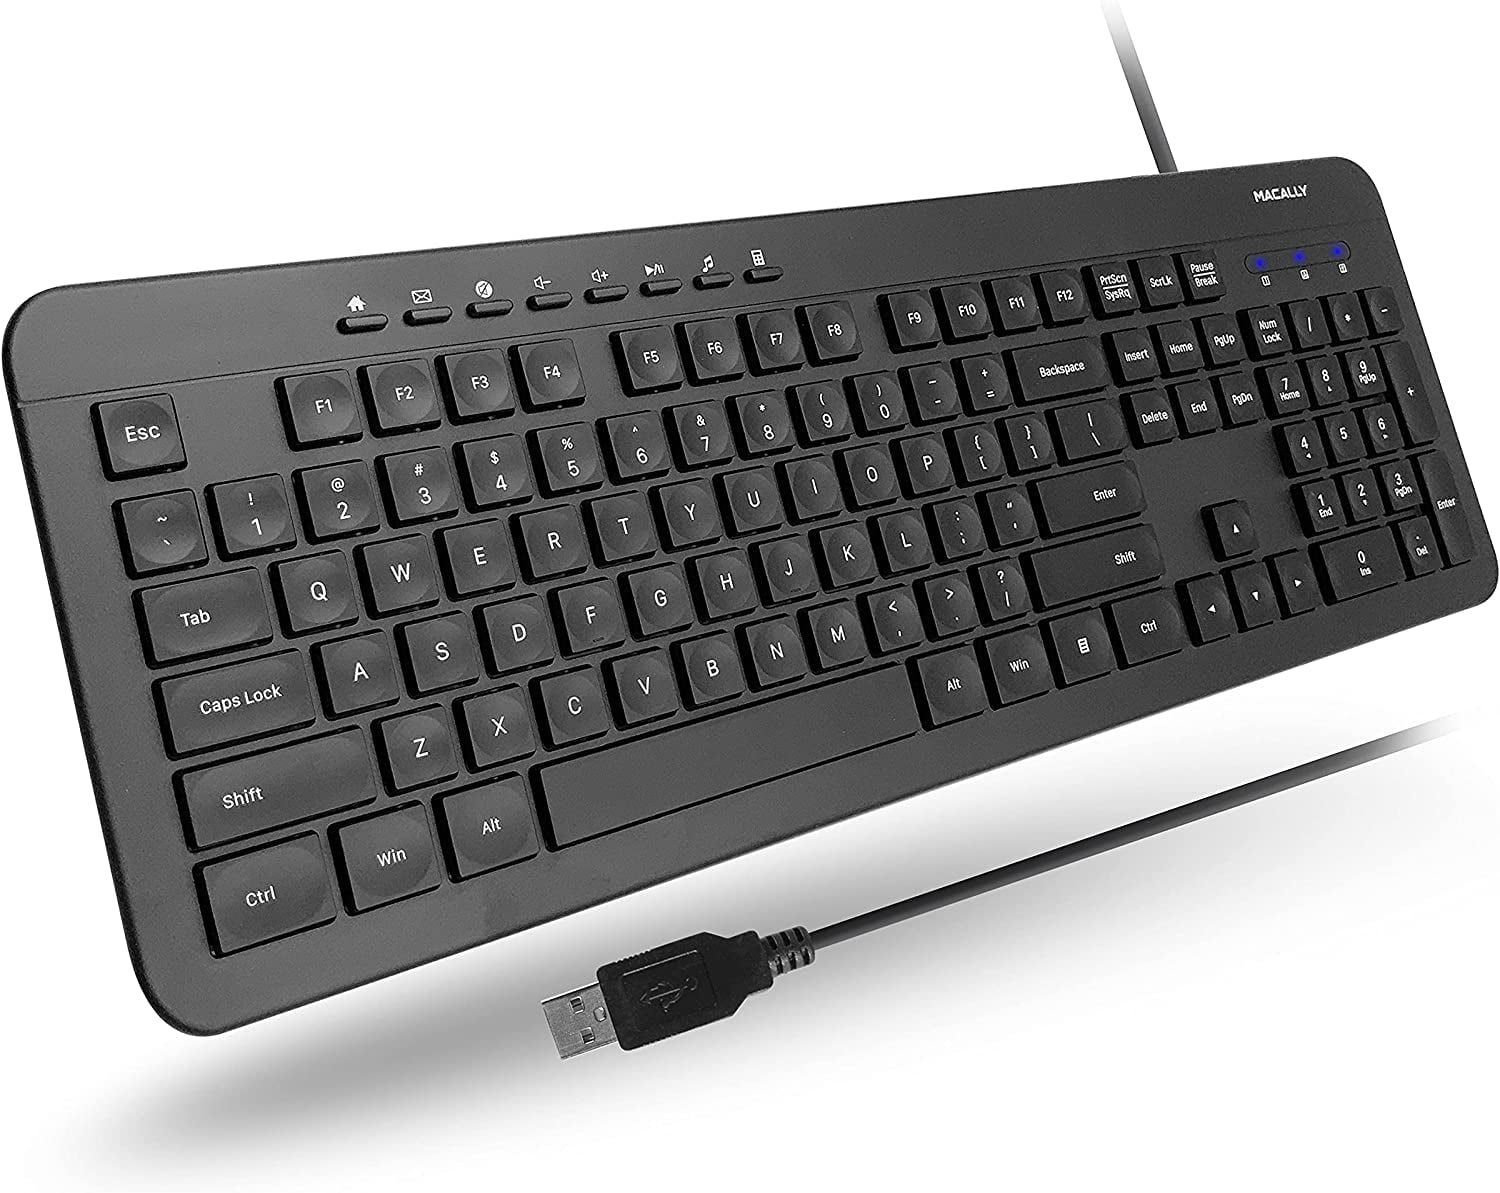 Logitech K120 Wired Keyboard for Windows, USB Plug-and-Play, Full-Size,  Spill-Resistant, Curved Space Bar, Compatible with PC, Laptop, Black